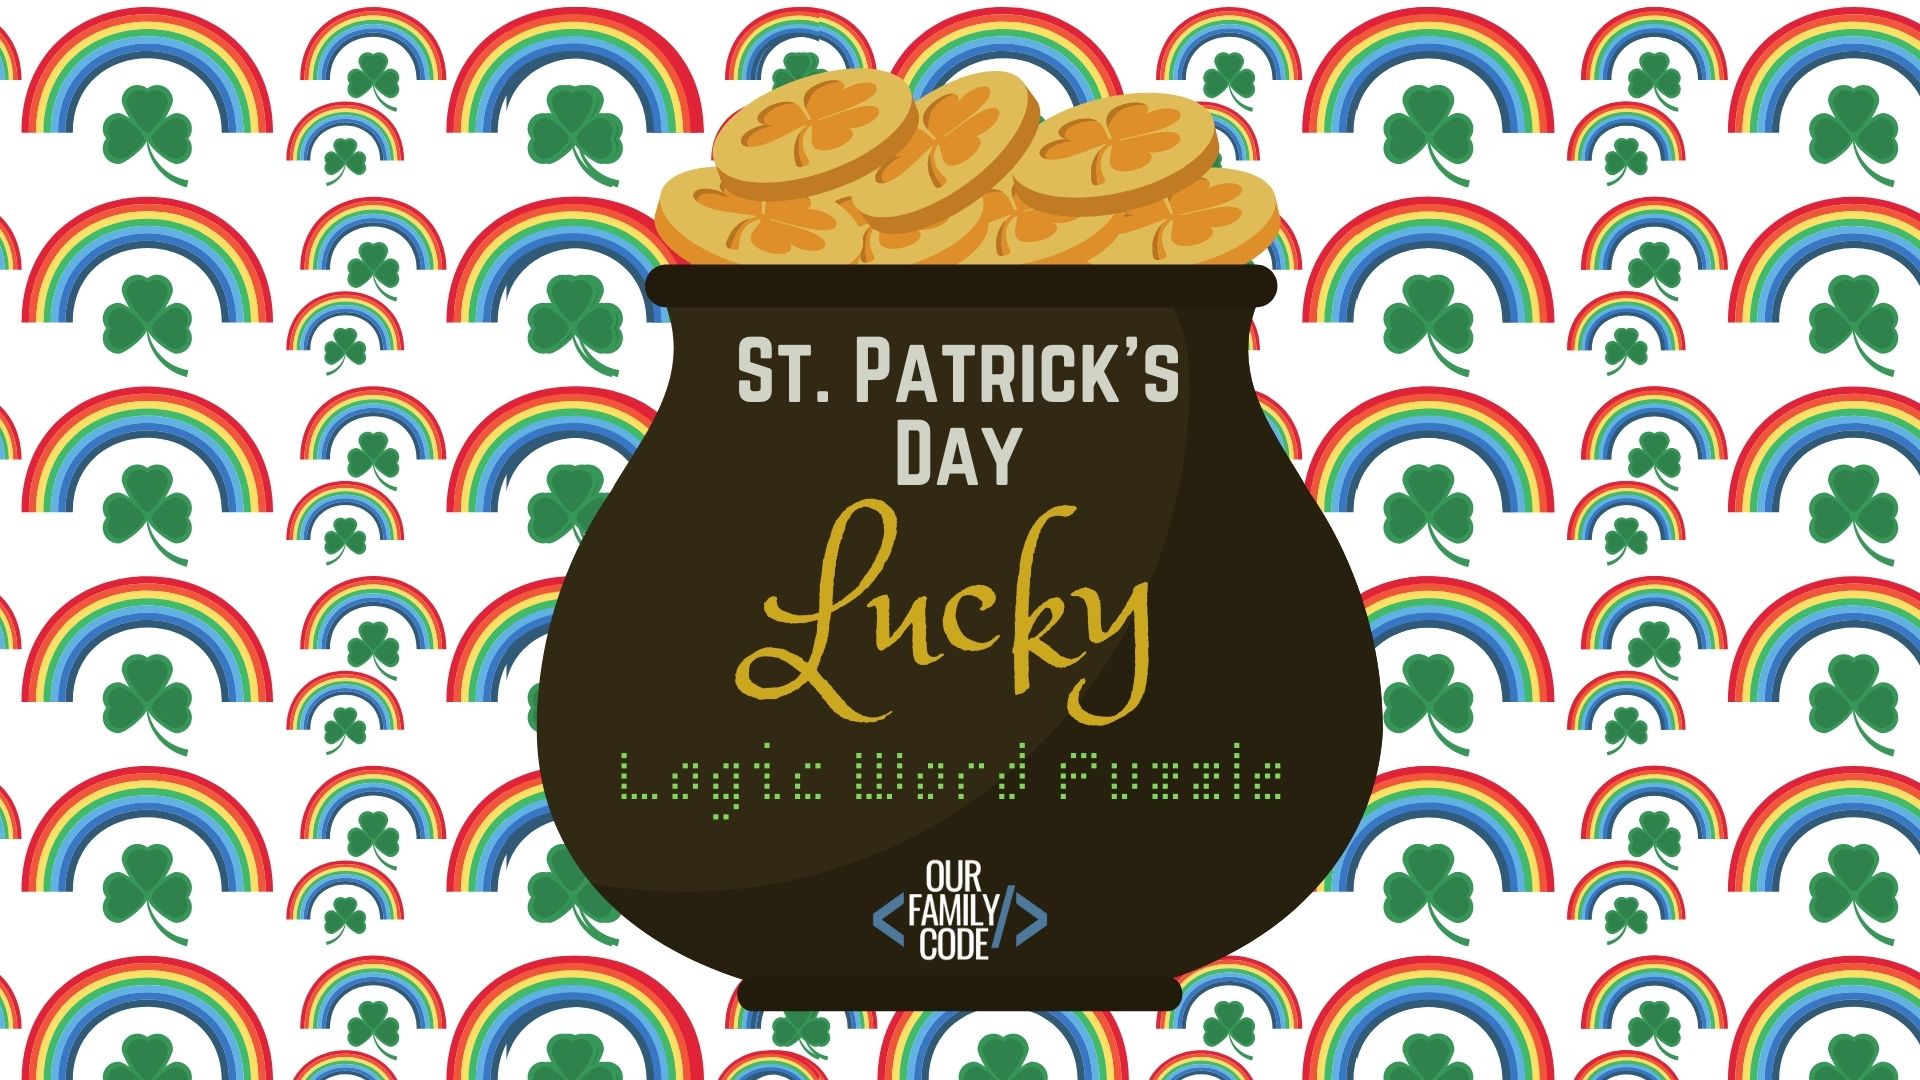 This St. Patrick's Day lucky logic word puzzle activity is a way for kids to use logical thinking and pattern matching paired with spatial recognition and spelling. #teachkidstocode #logicpuzzles